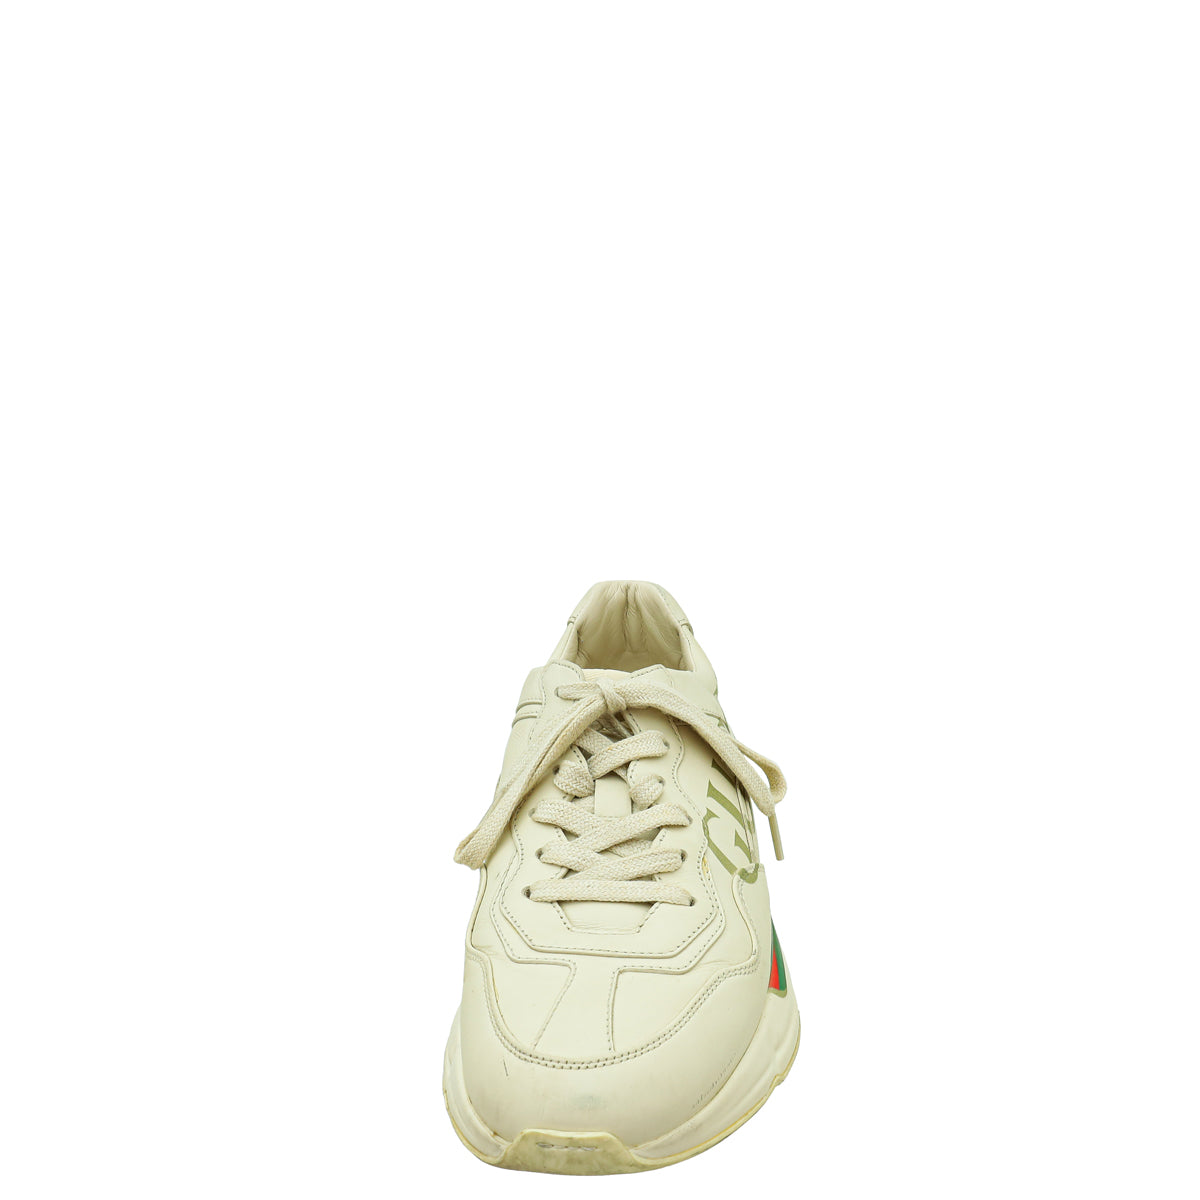 Gucci Ivory Logo Rhyton Trainer Sneakers 37.5